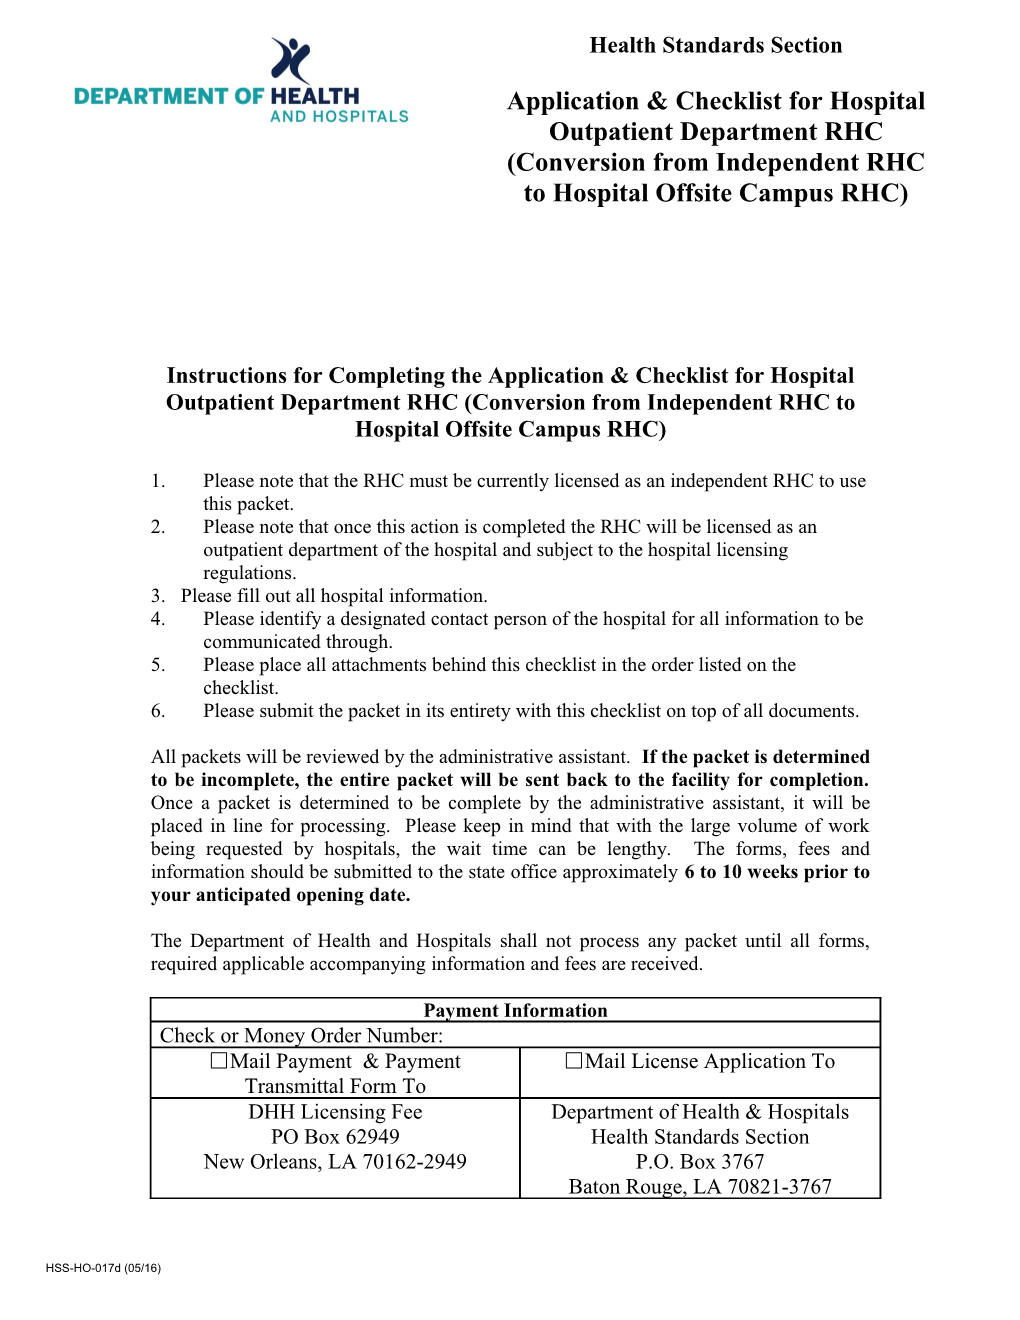 Instructions for Completing the Application & Checklist for Hospital Outpatient Department